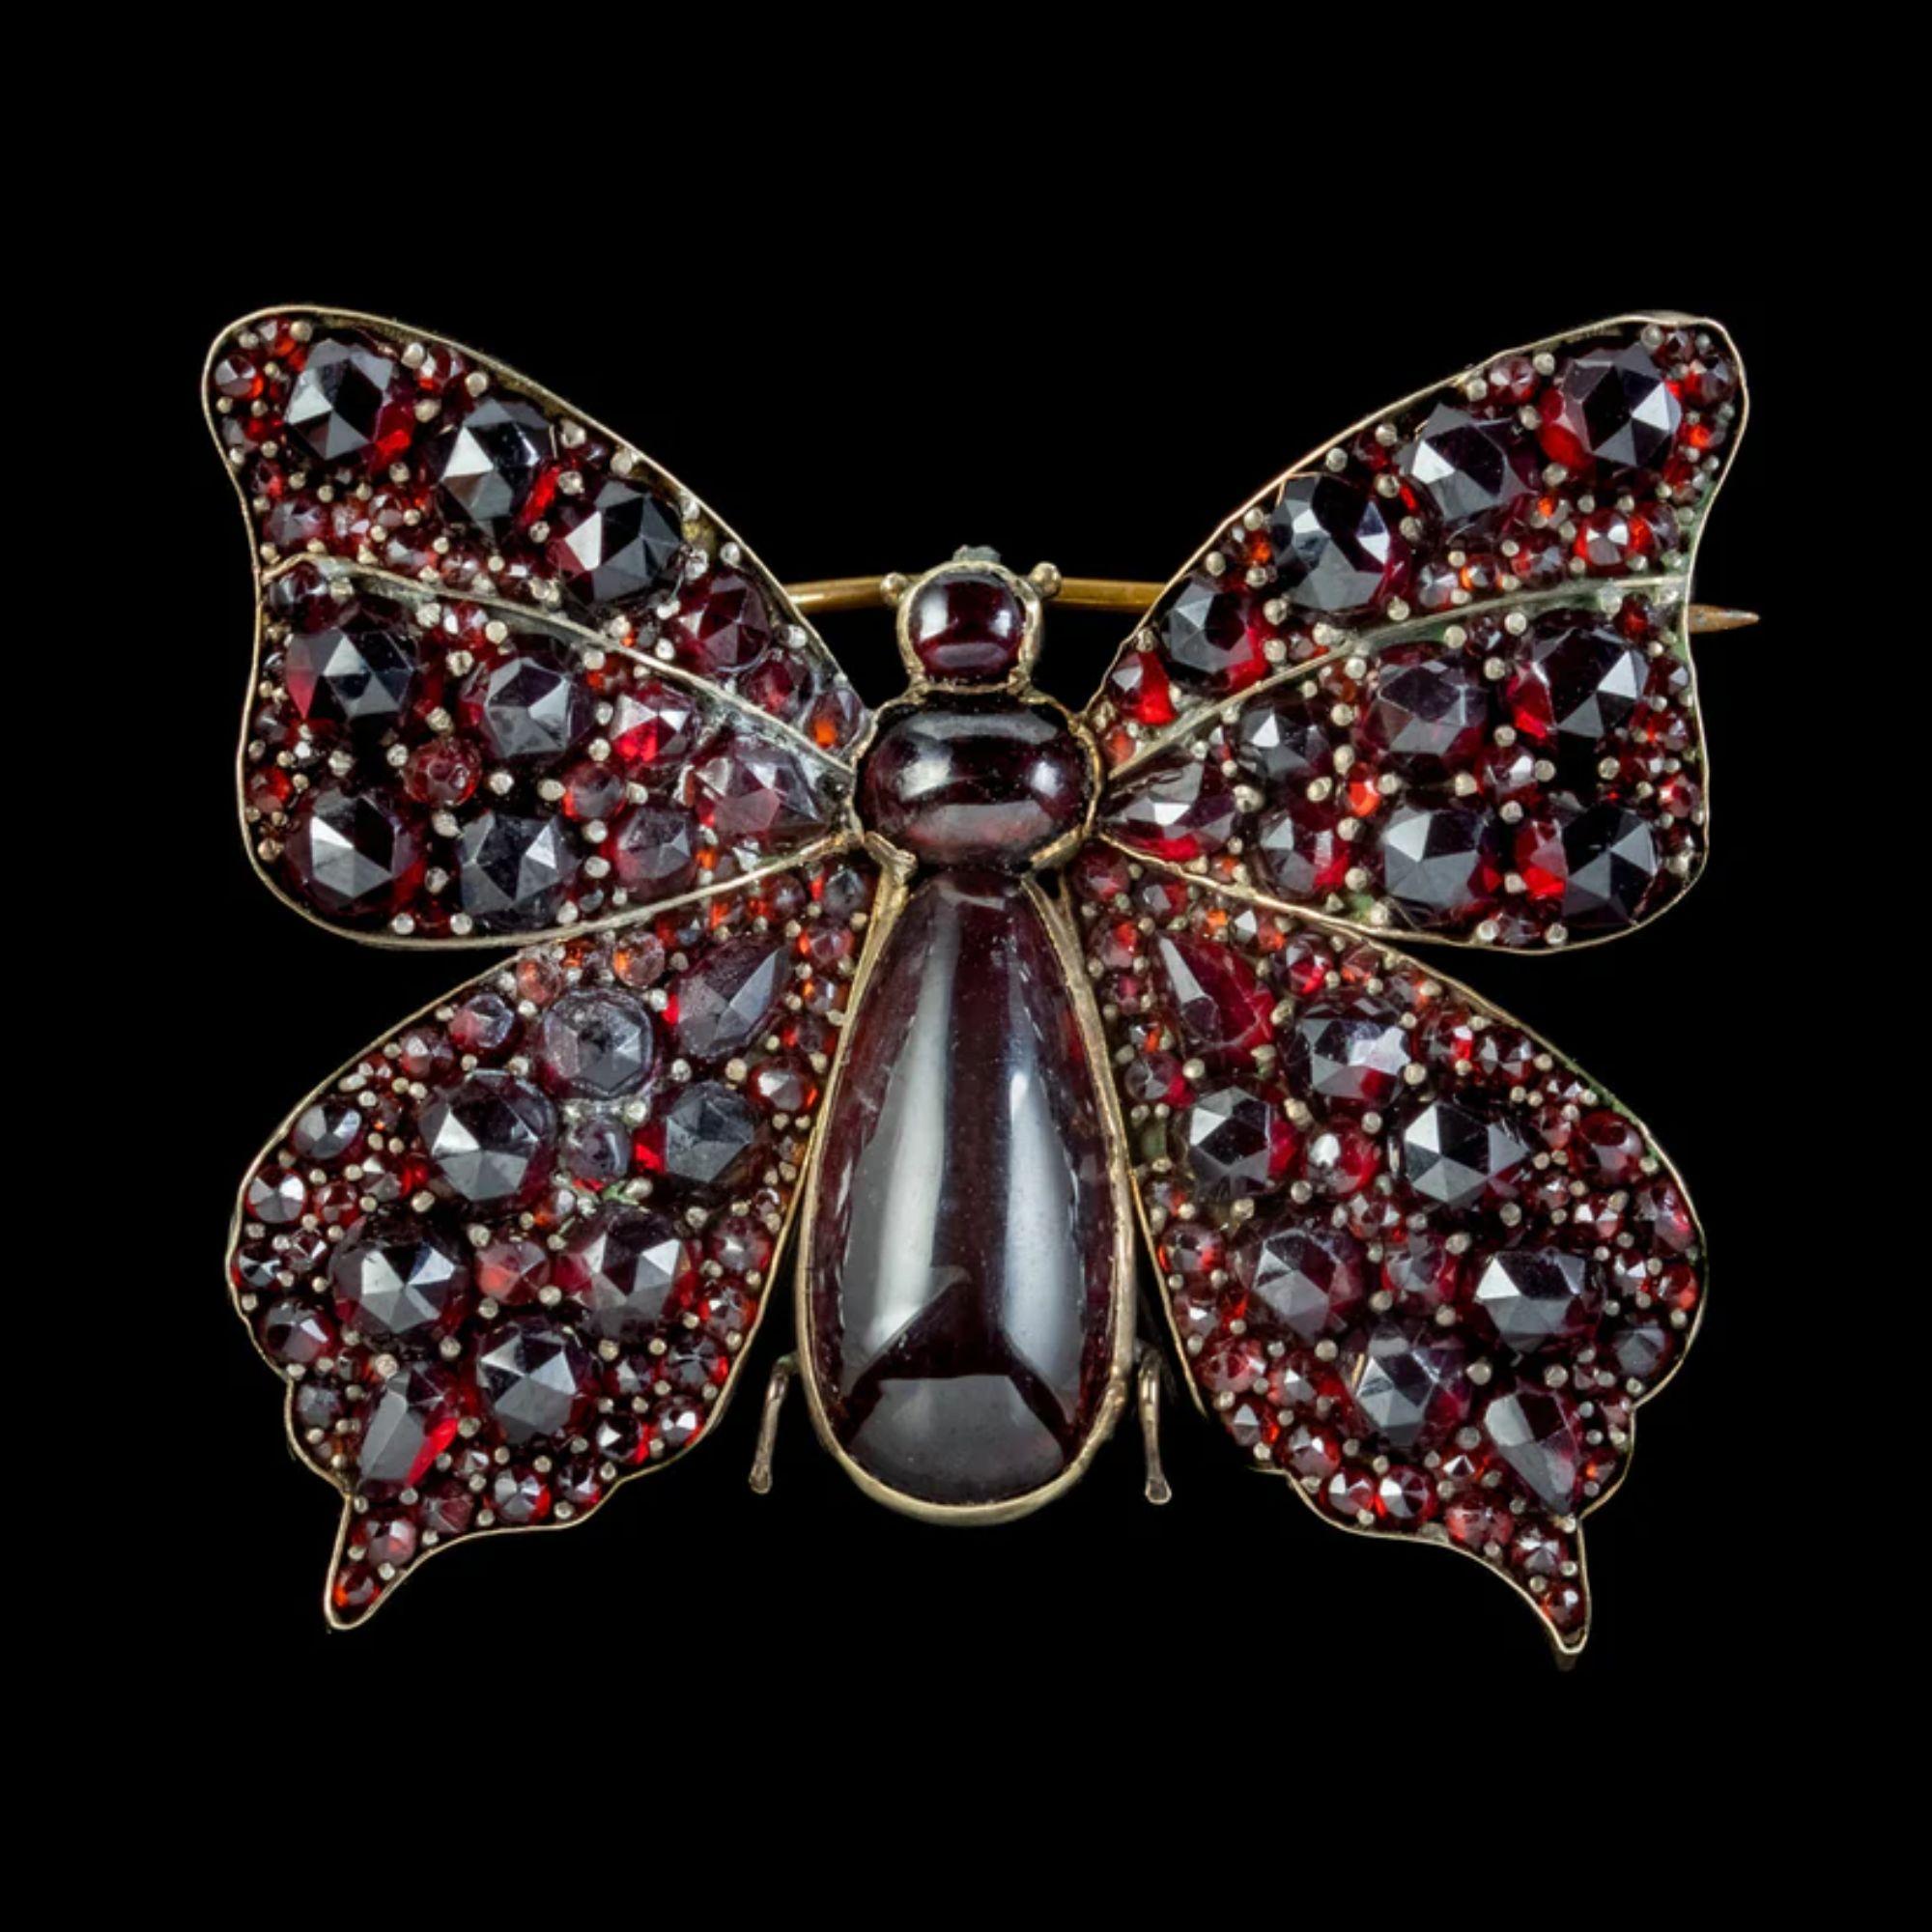 A pretty antique Victorian butterfly brooch encrusted with a gorgeous collection of Bohemian garnets with a blazing red glow beneath their dark surface. The garnets are rose cut across the wings with larger cabochons making up the body and